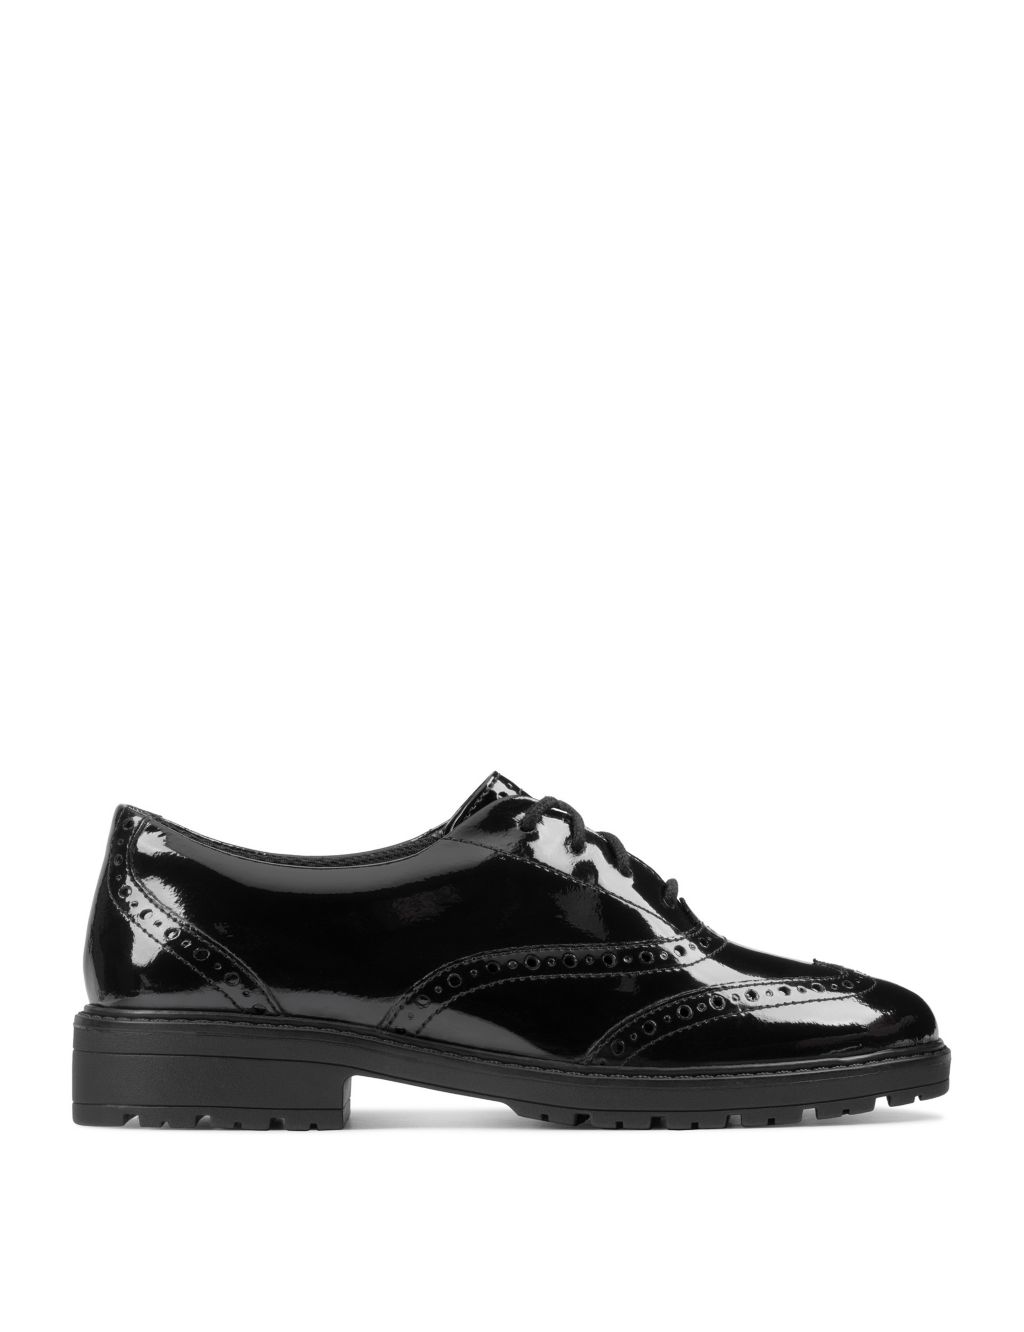 Kids' Patent Leather Brogues (3 Large - 9 Large)